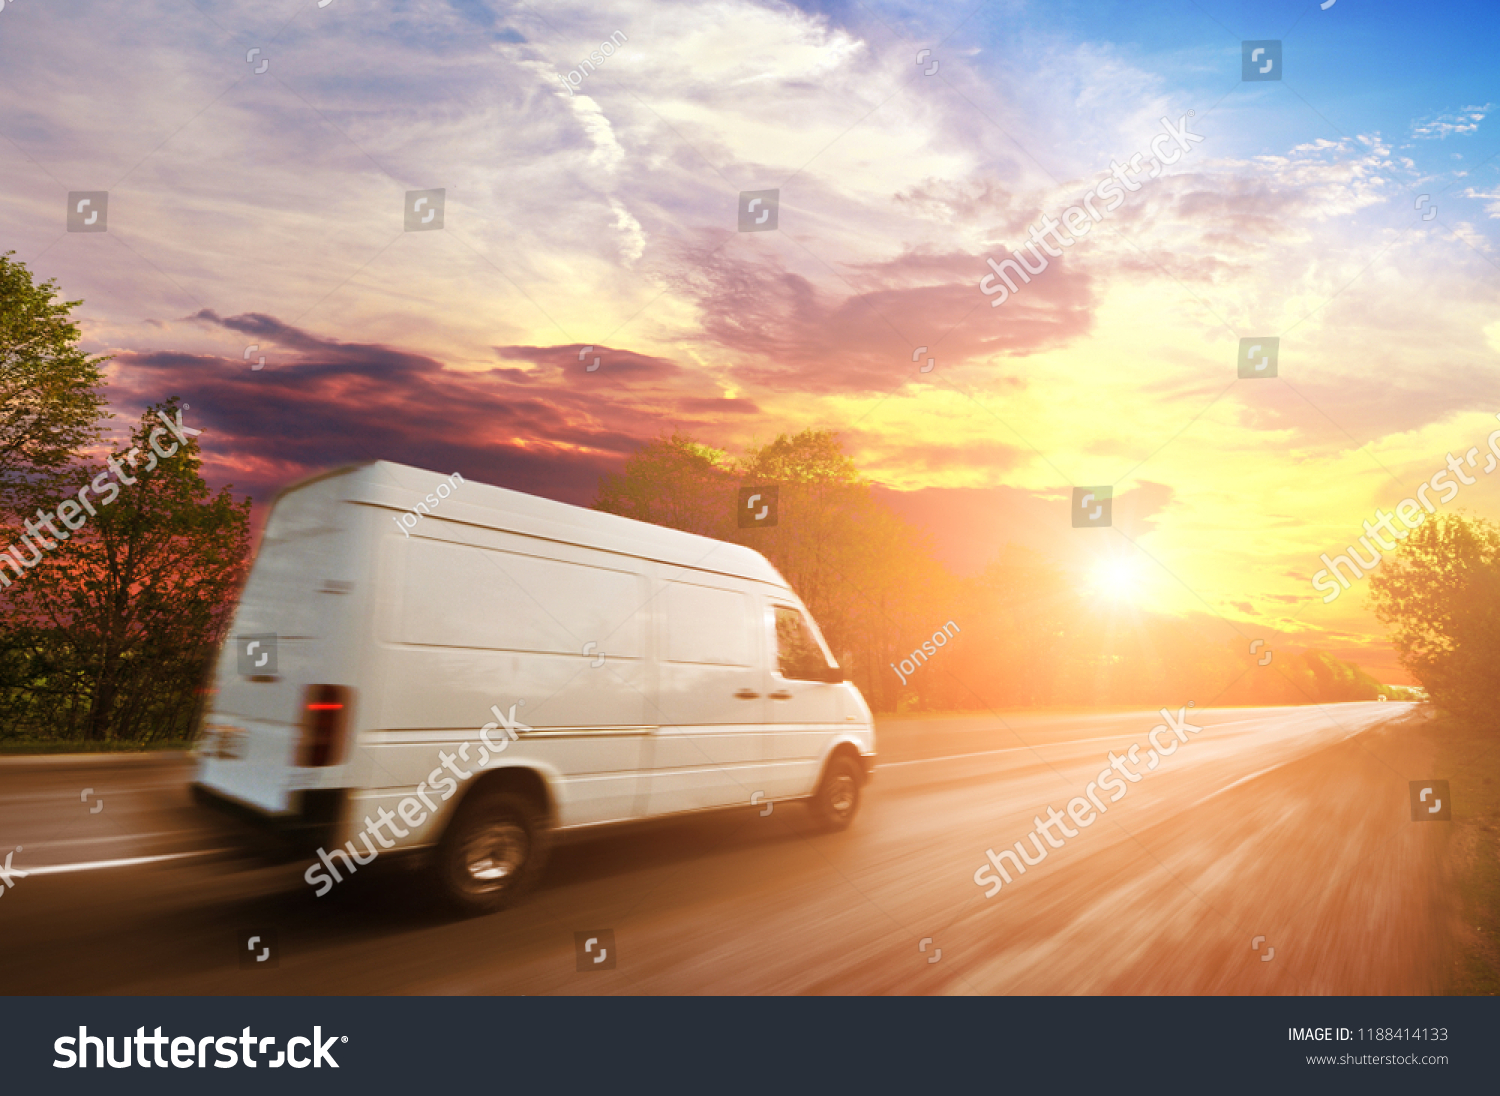 Big white van in motion on the countryside road shipping goods against night sky with sunset #1188414133